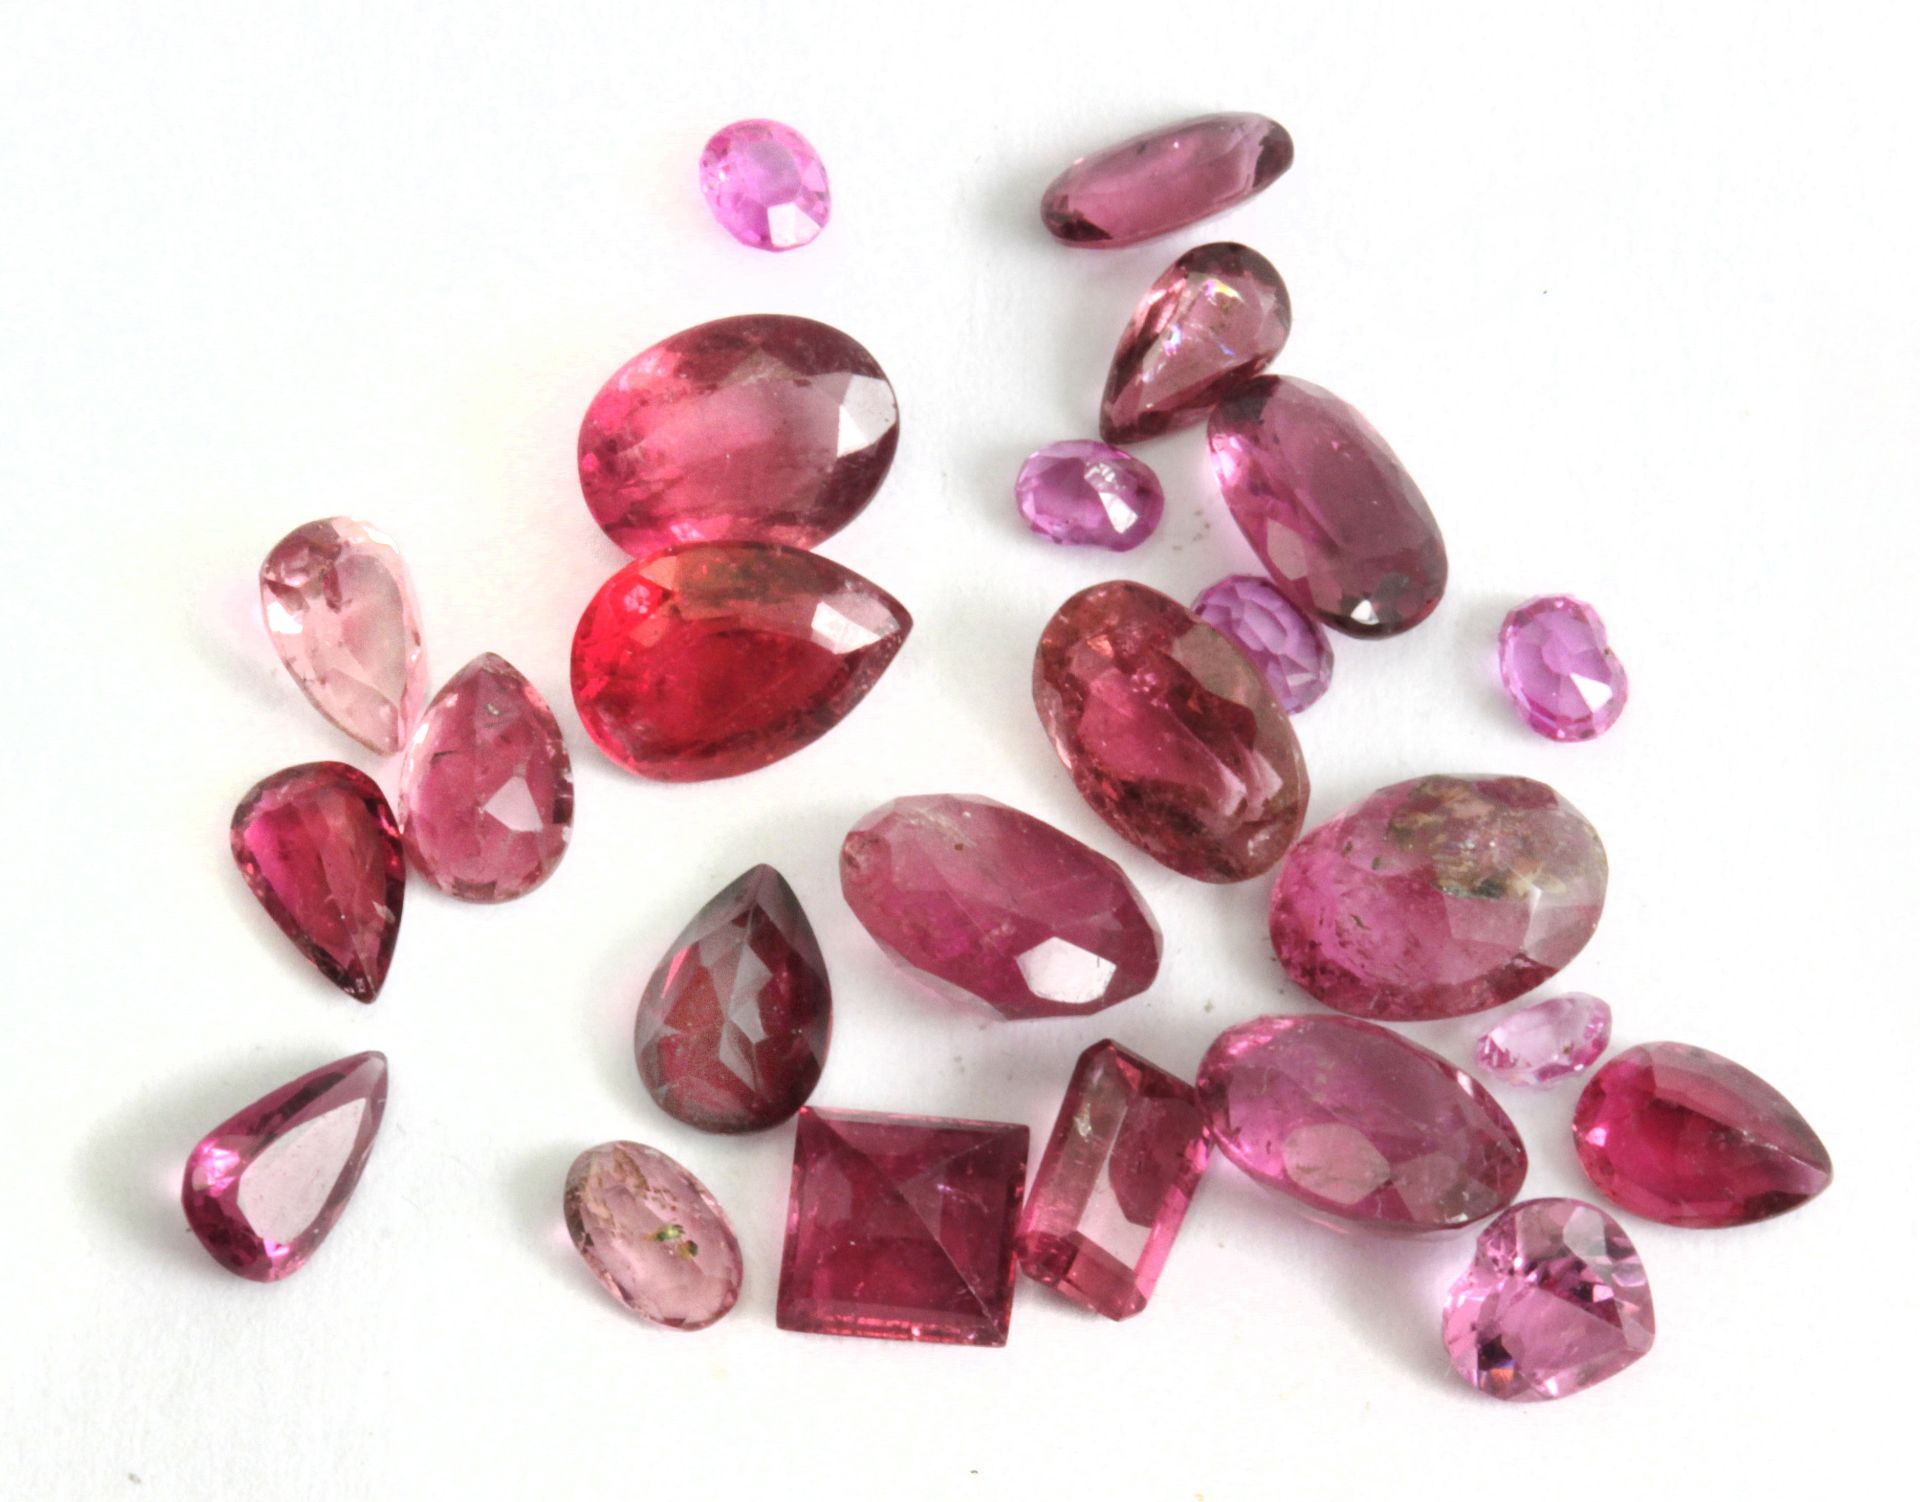 A collection of 24 loose Rubellite tourmalines